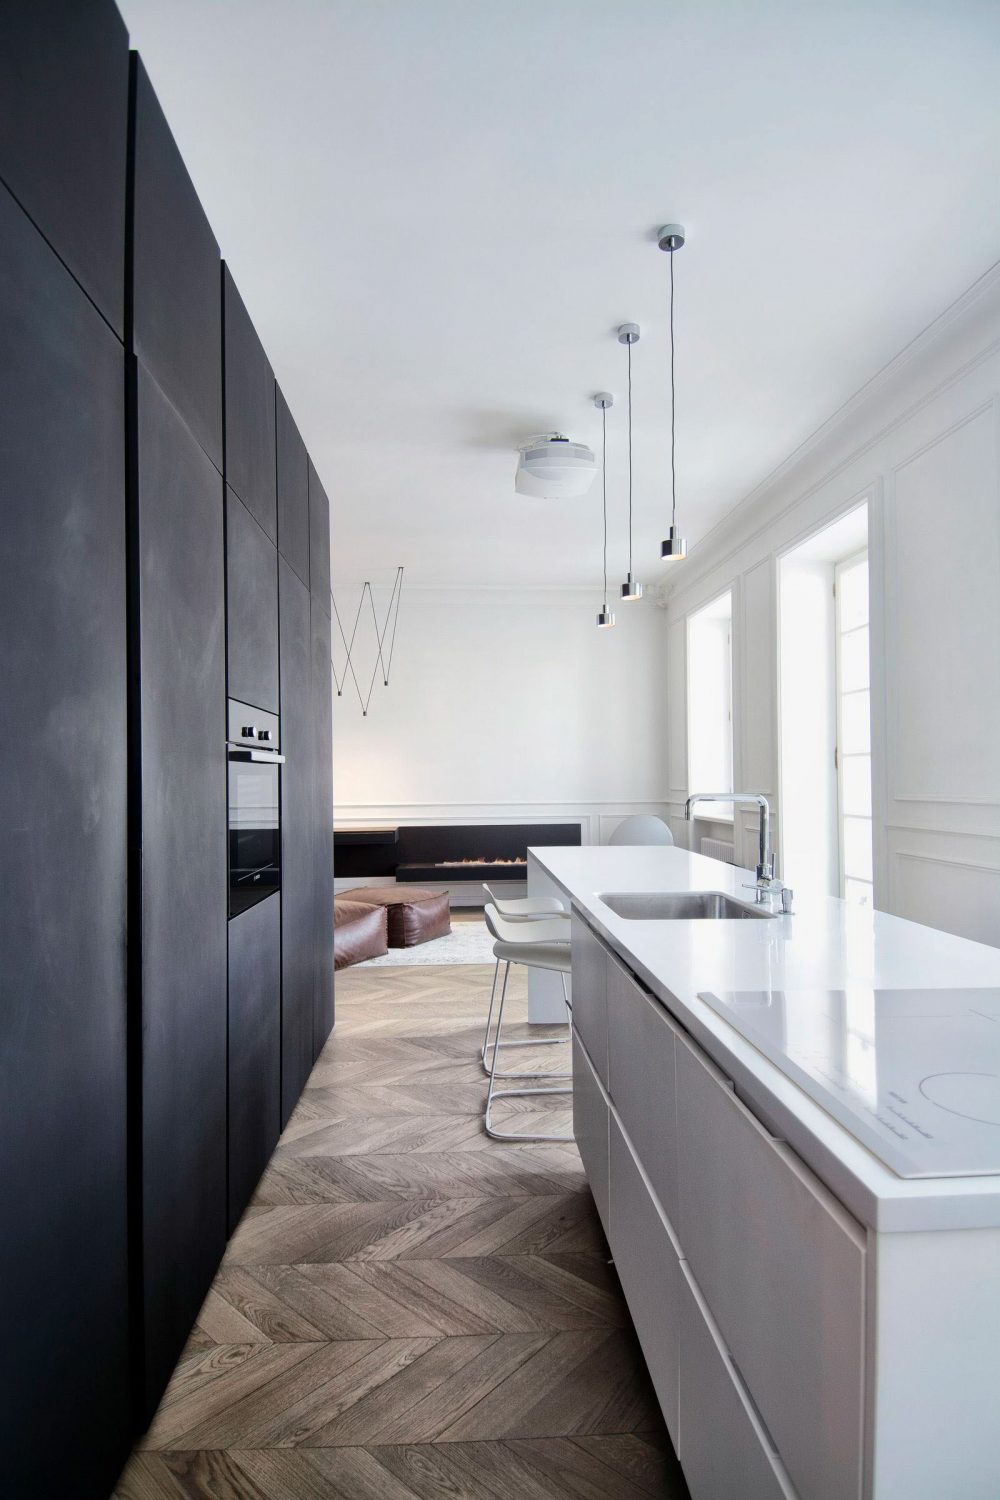 Interior AM – Renovation by INT2 architecture